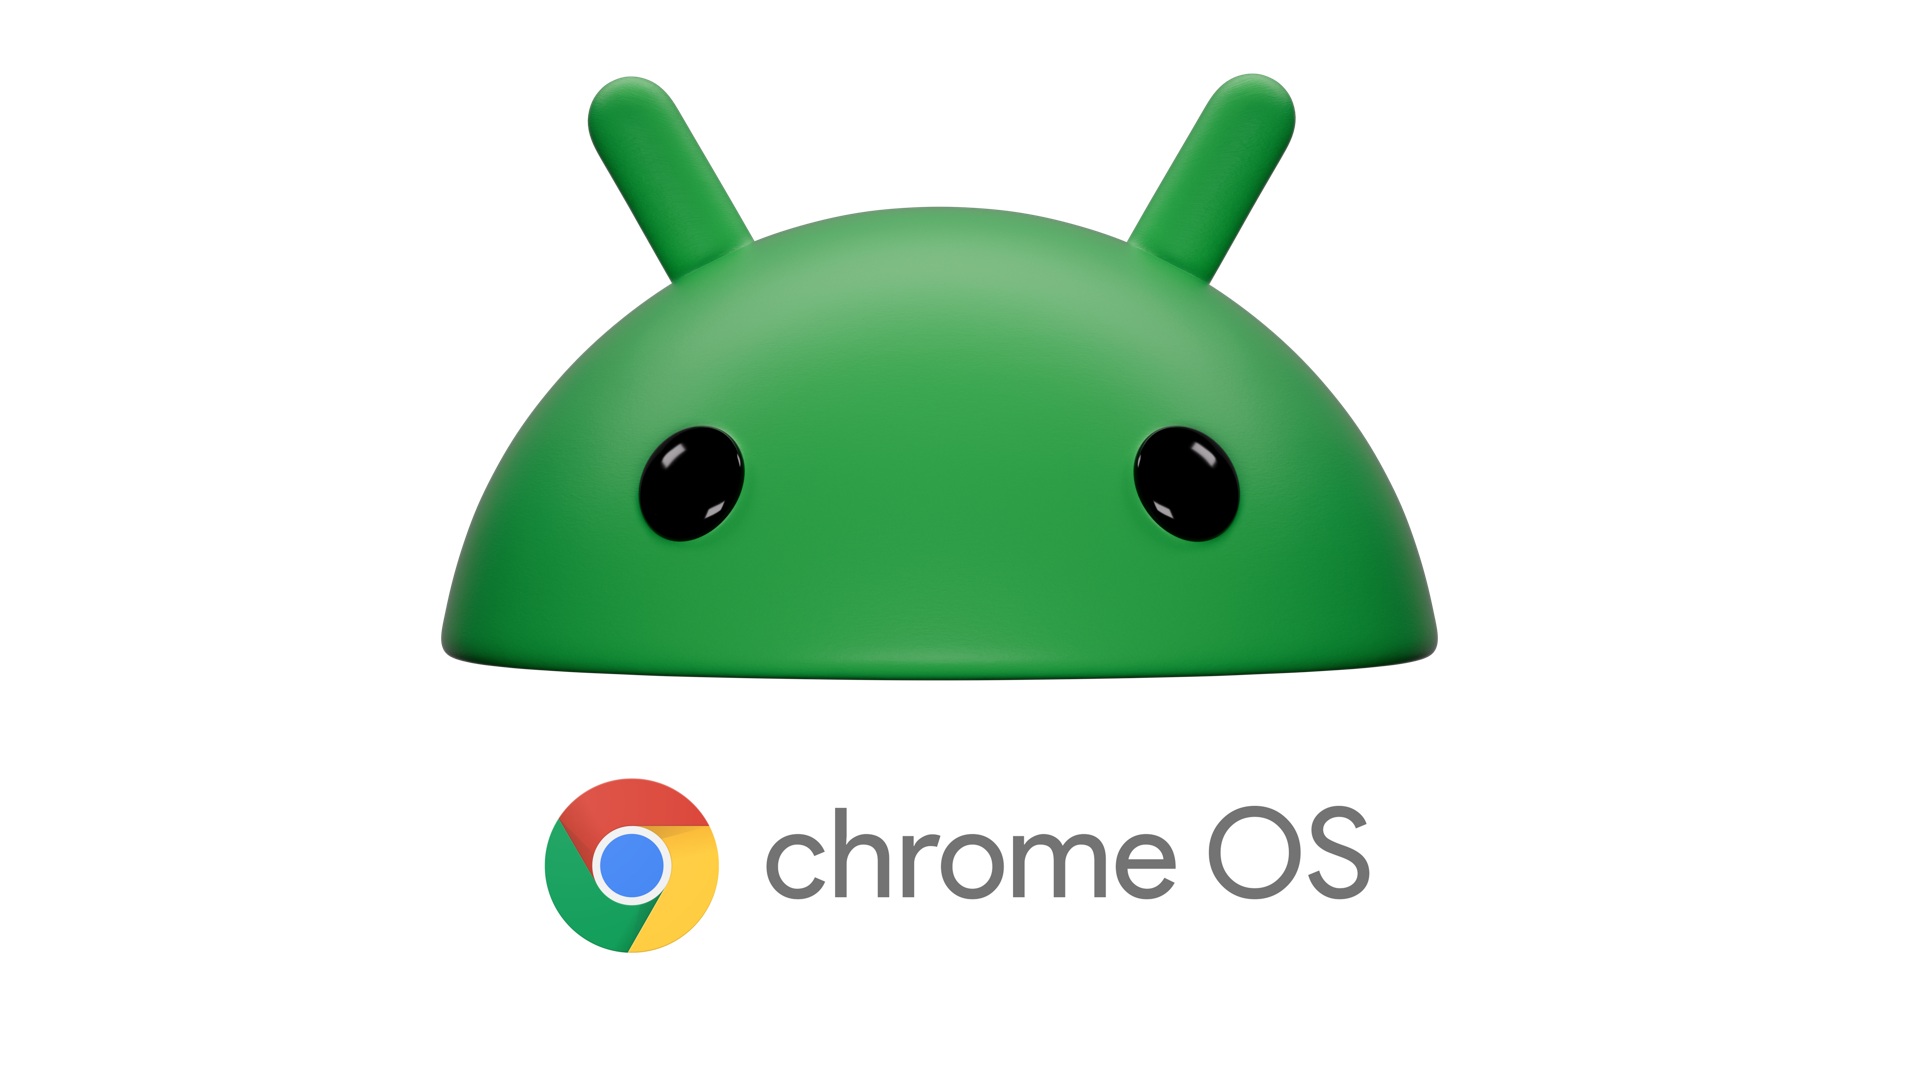 Common tech stack - Android and ChromeOS (Images: Google)